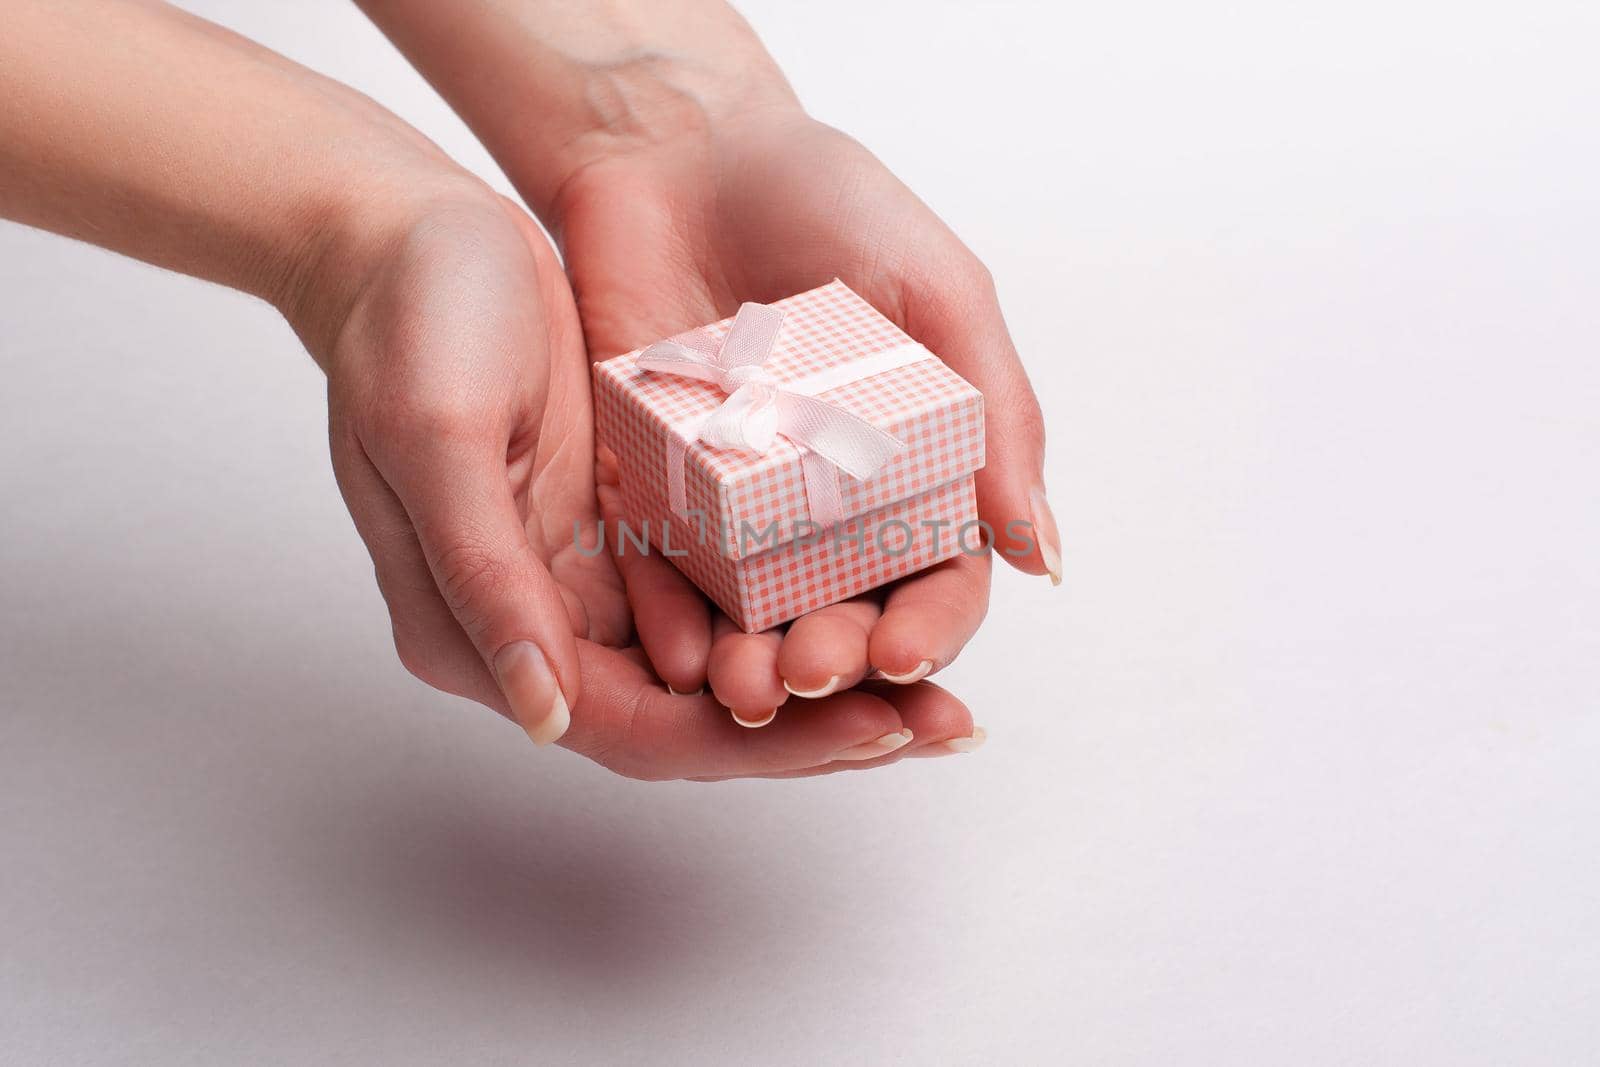 Female hand holding a gift with a bow.